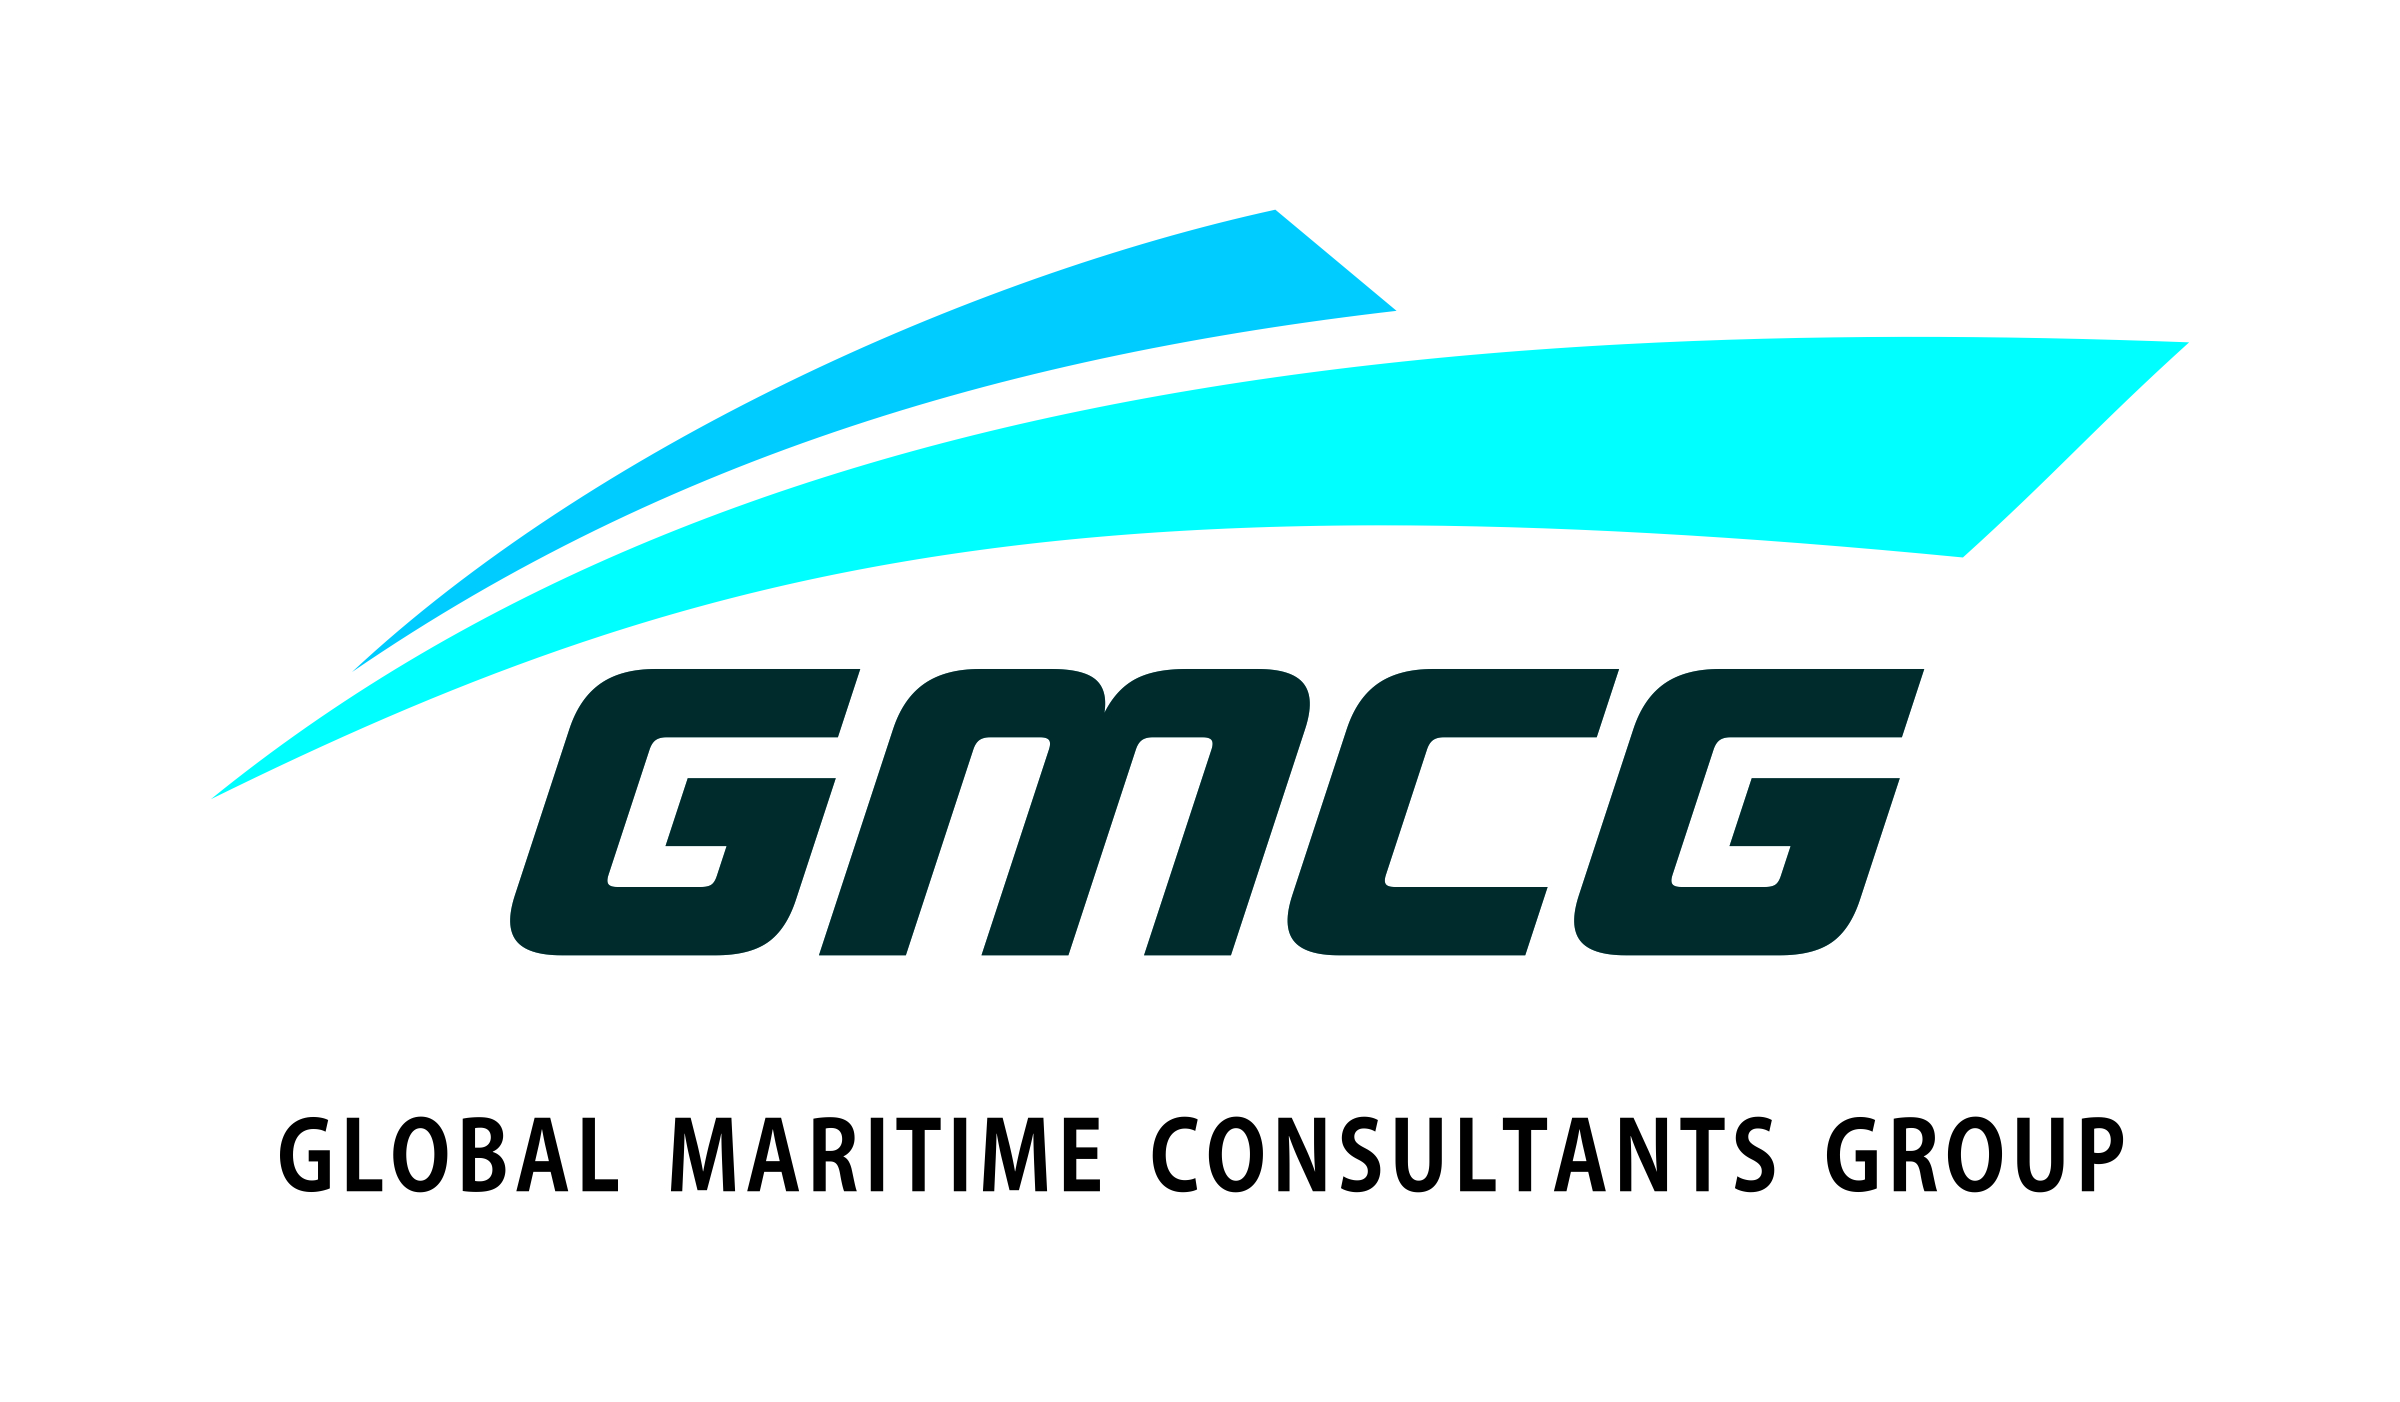 GLOBAL MARITIME CONSULTANTS GROUP